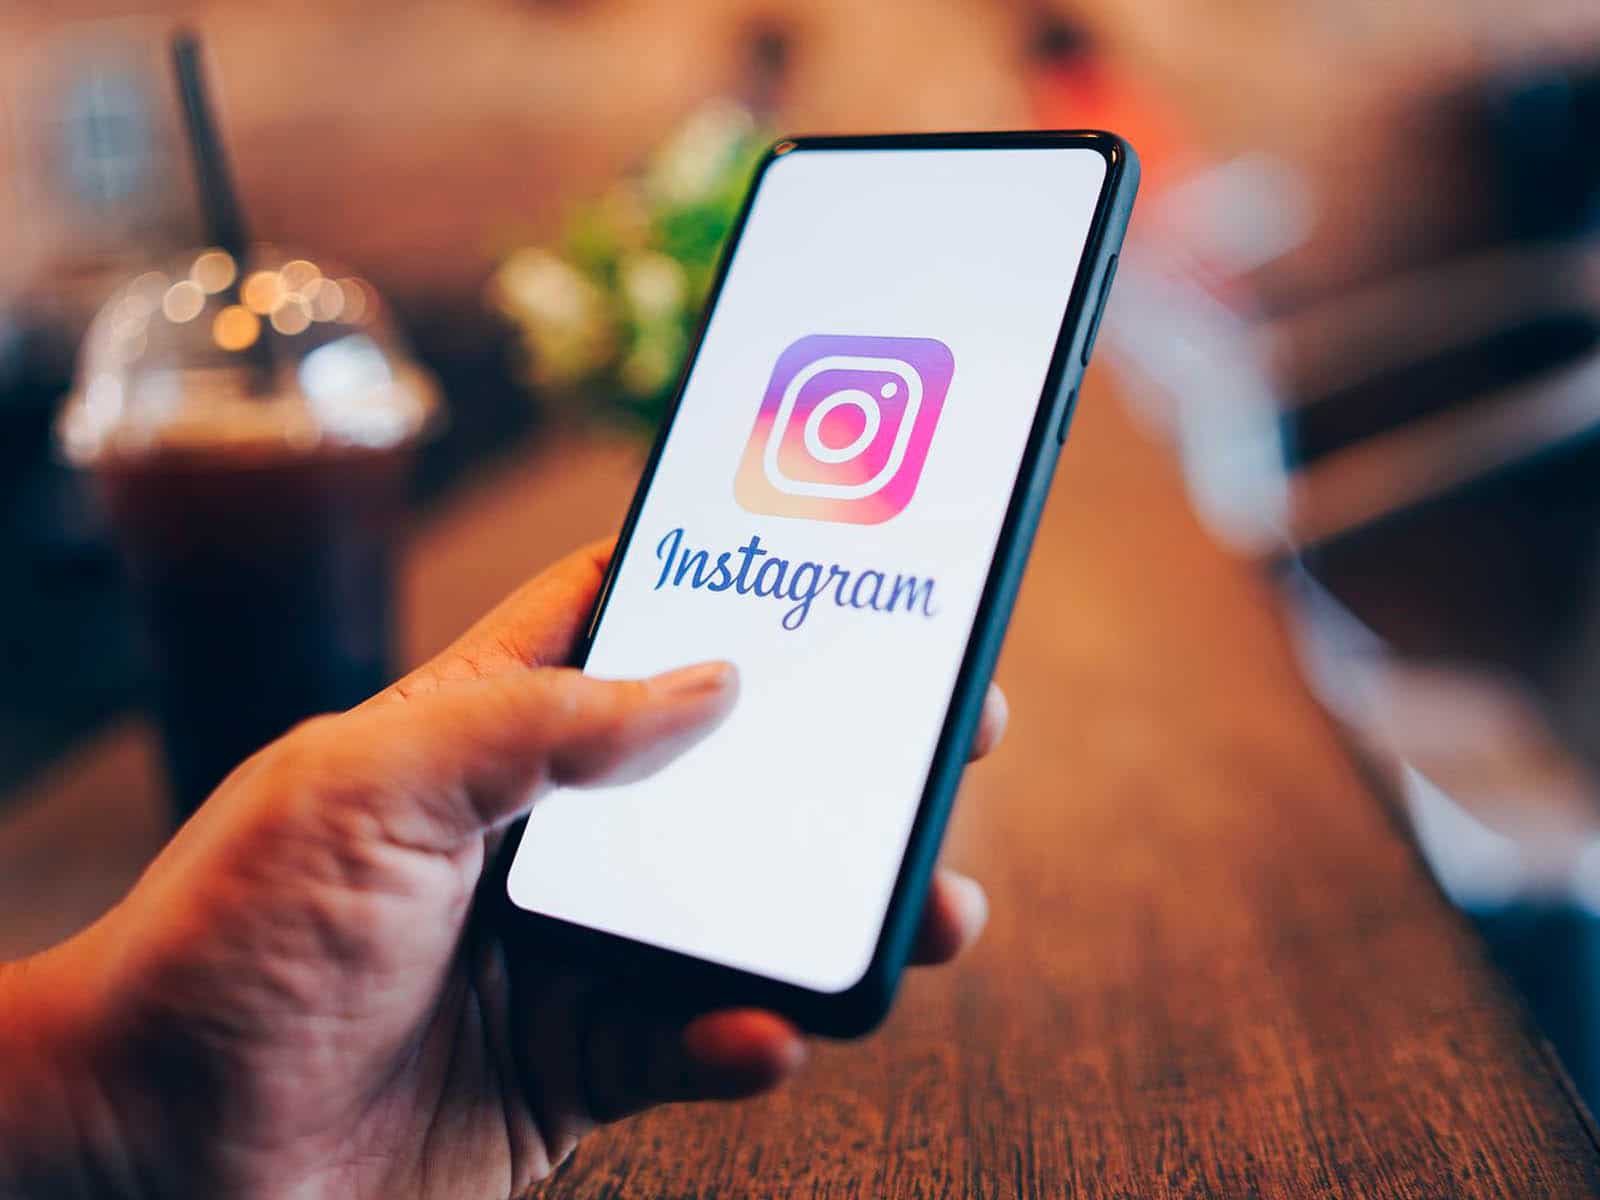 Instagram to verify age by scanning face